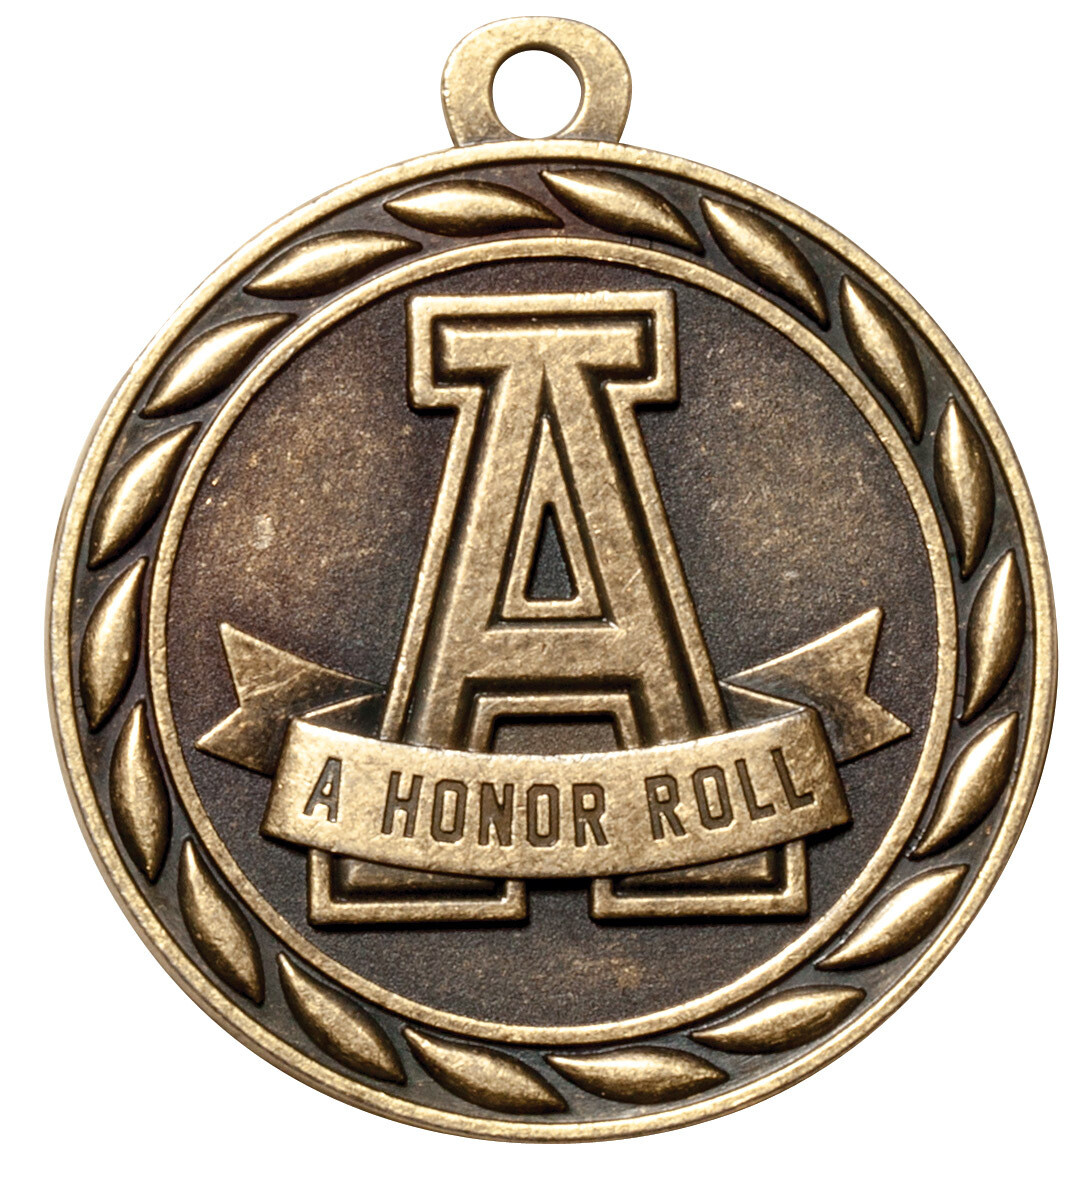 Scholastic Medal Series
A HONOR ROLL